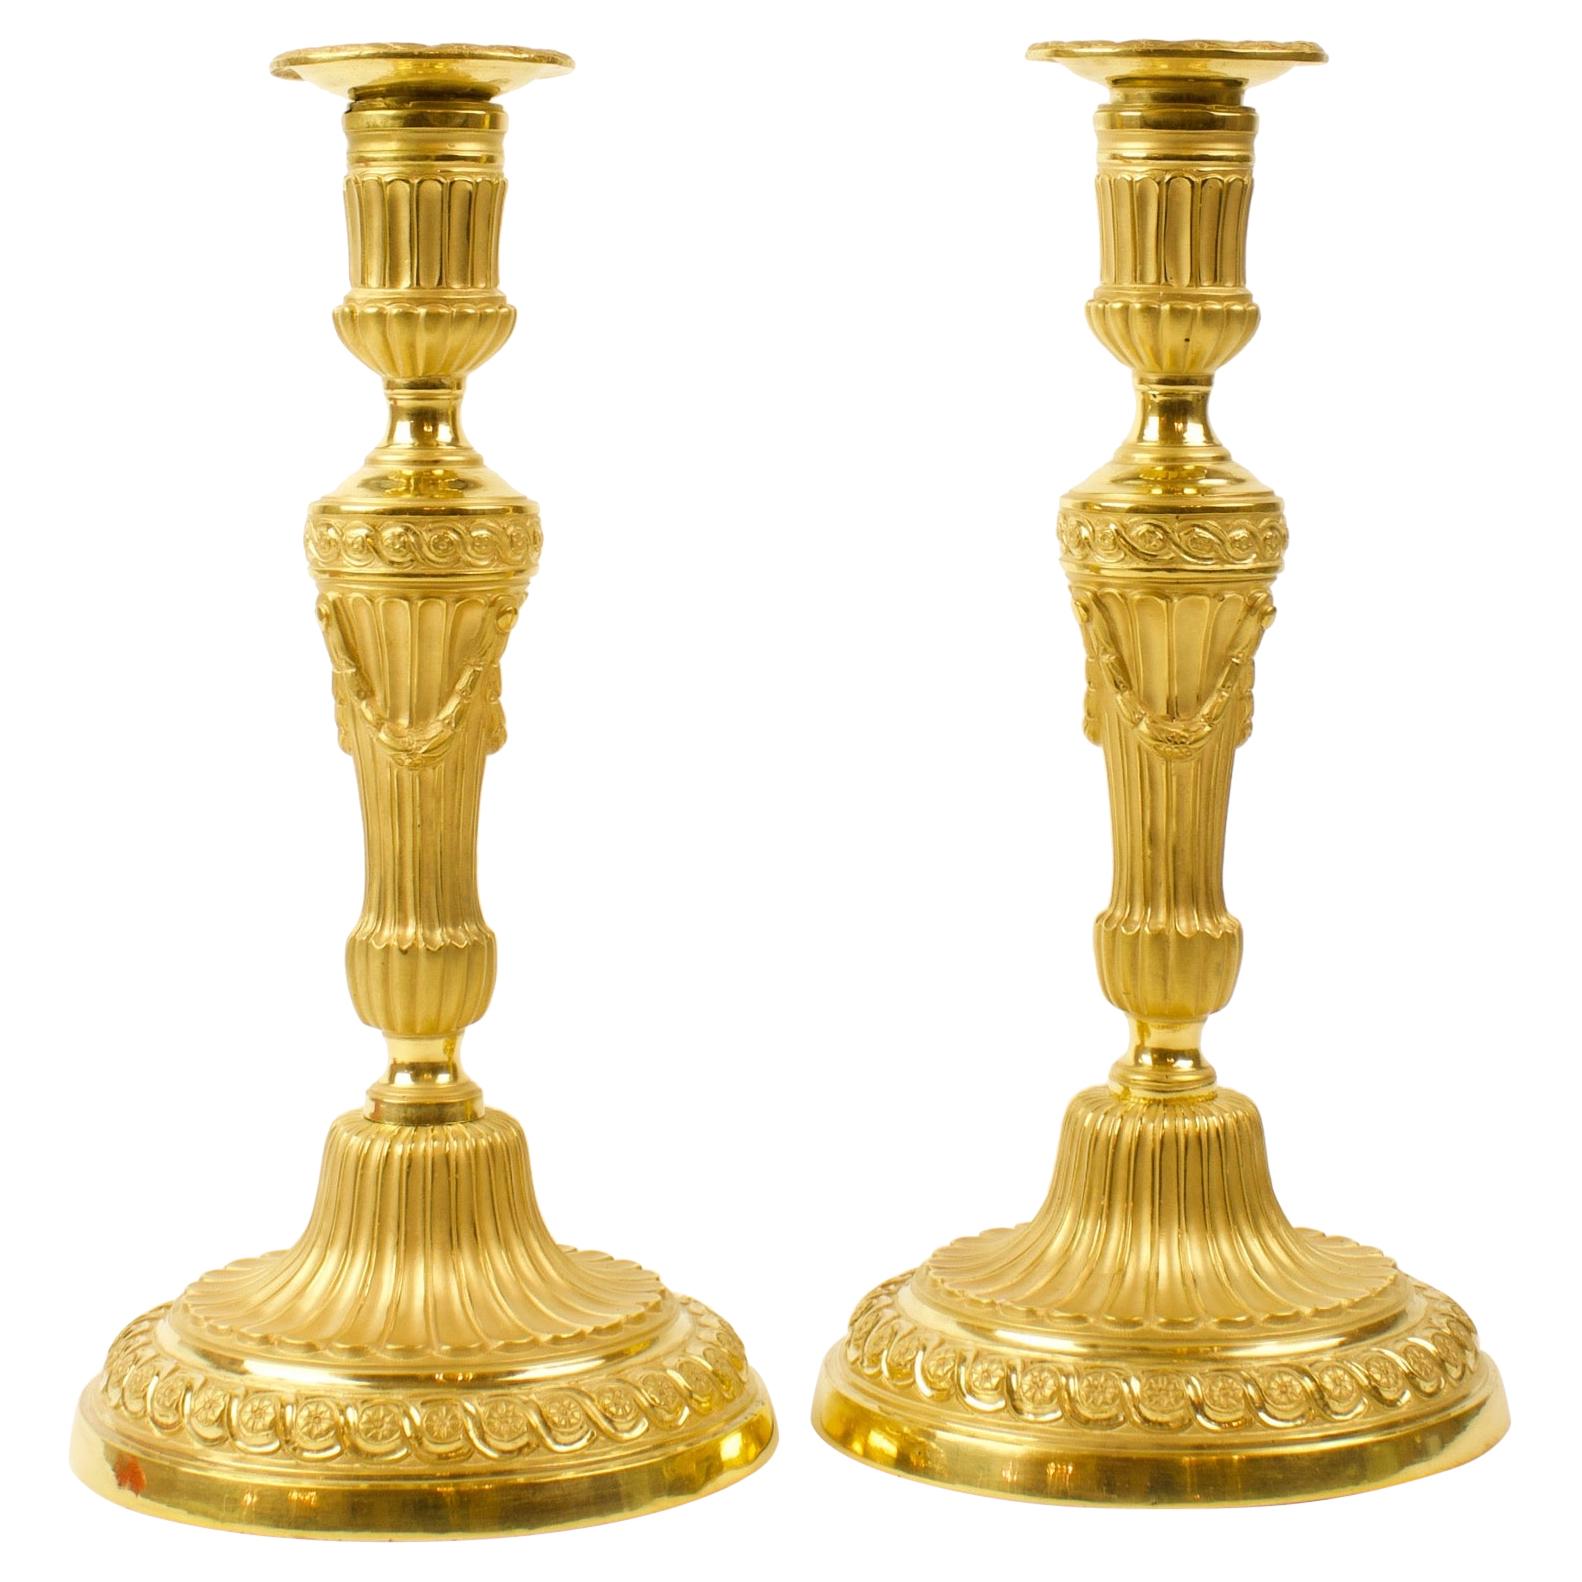 Pair of 18th Century French Louis XVI Neoclassical Gilt Bronze Candlesticks